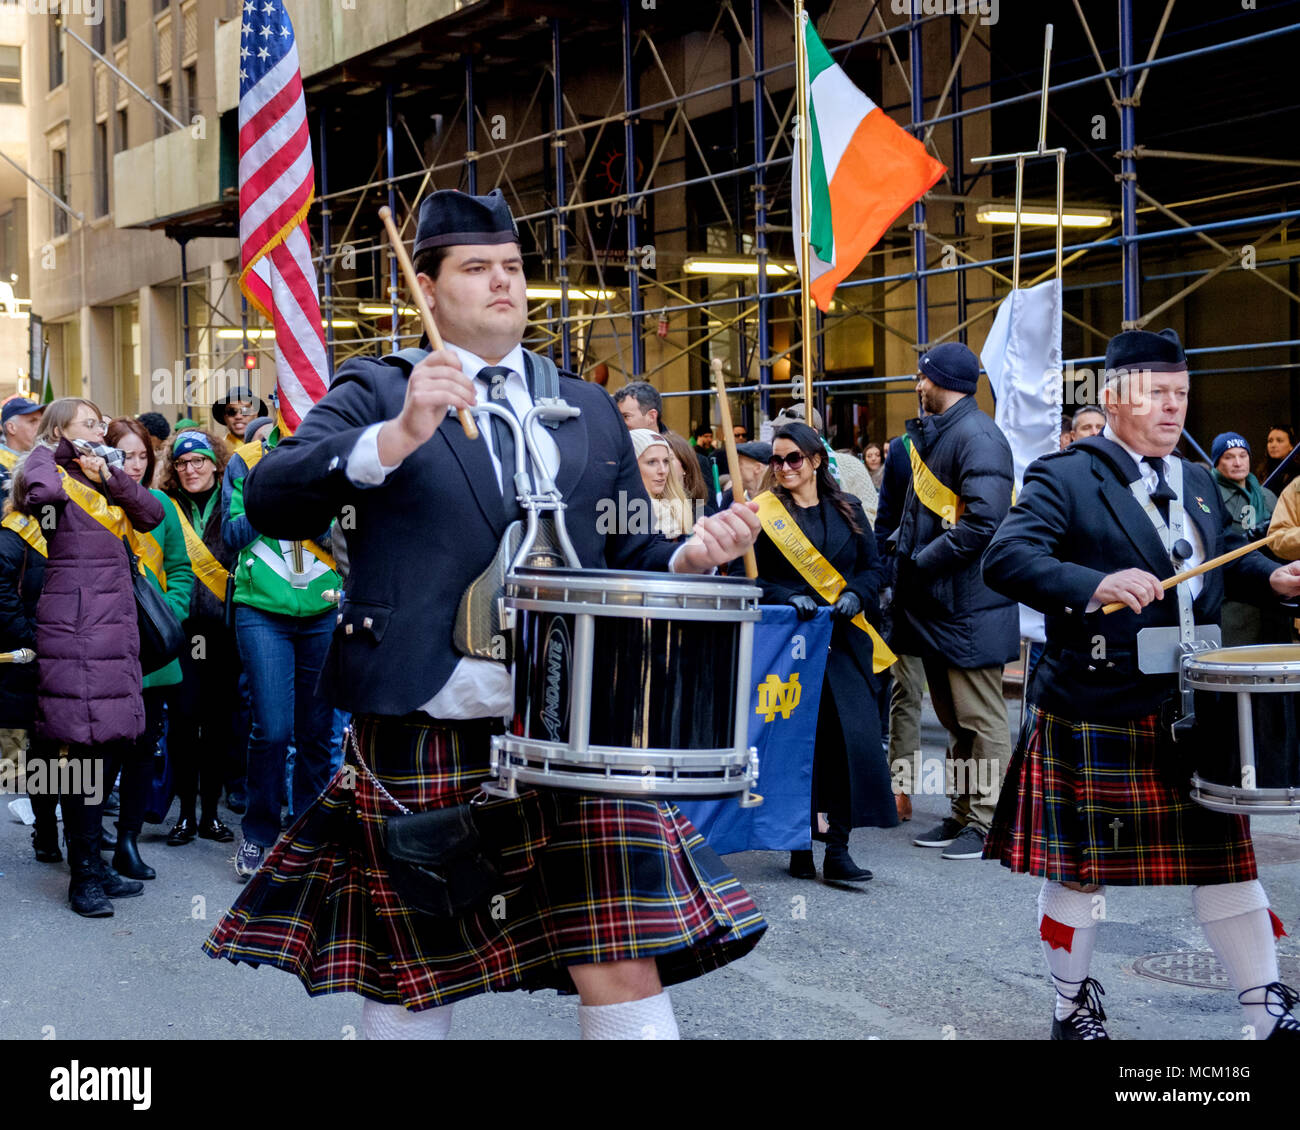 The 'alternative' inclusive St Patrick's Day parade in New York